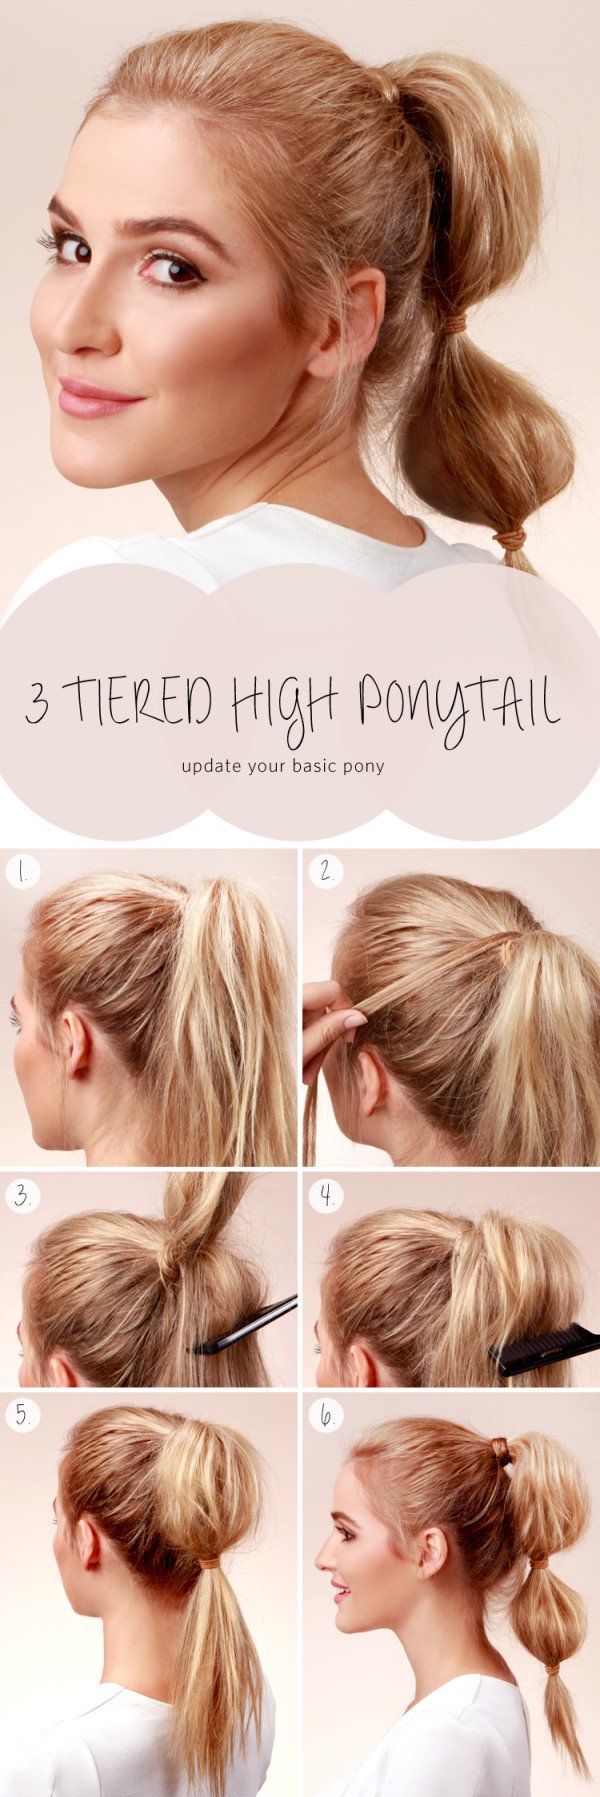 14 Cute And Easy Ways To Create Awesome Hairstyle For Less ...